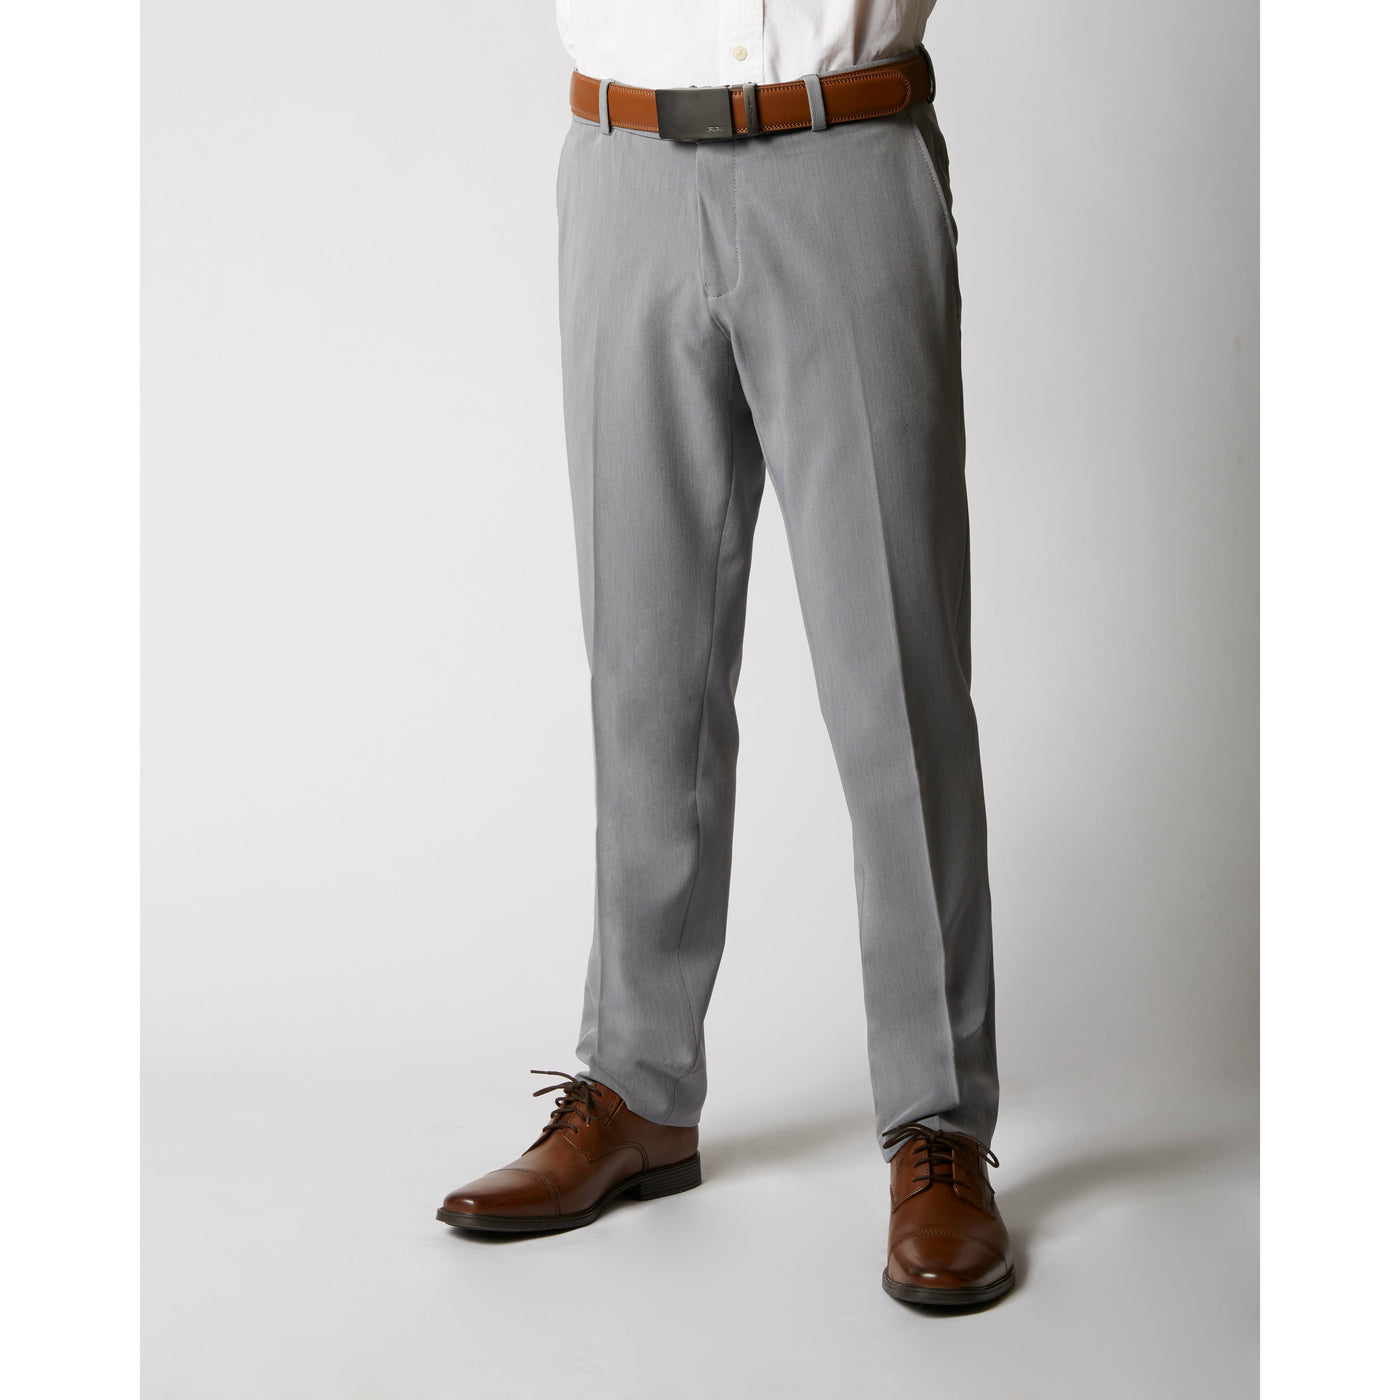 Tempo Slim Fit Dress Slacks - Move Confidently When You Shop Our Ogden  Clothing Store